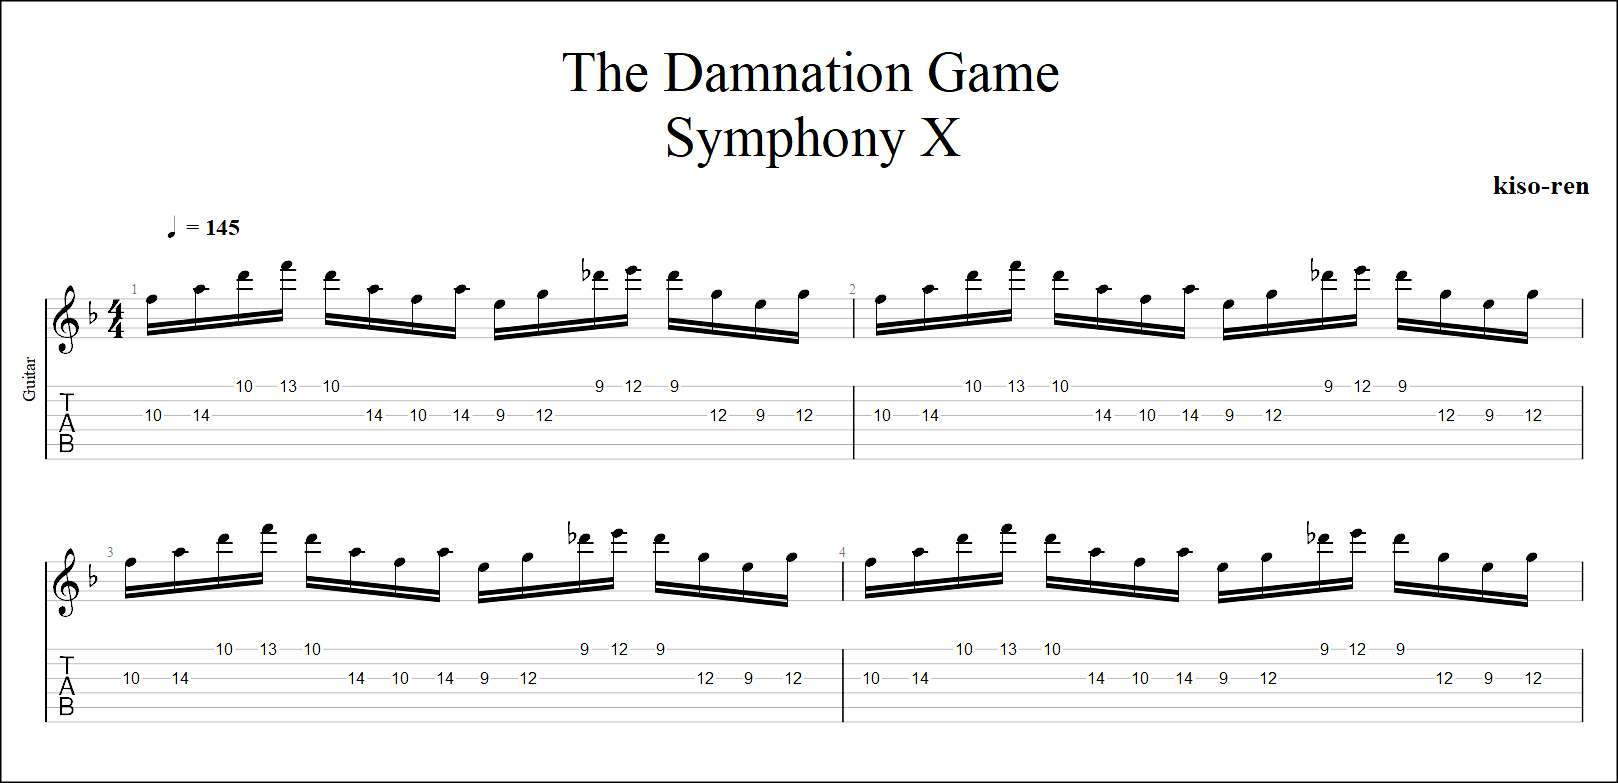 【TAB】The Damnation Game - Symphony X Guitar Intro Practice Michael Romeo マイケルロメオ ダムネーションゲーム イントロ ギターピッキング練習【Guitar Picking Vol.53】